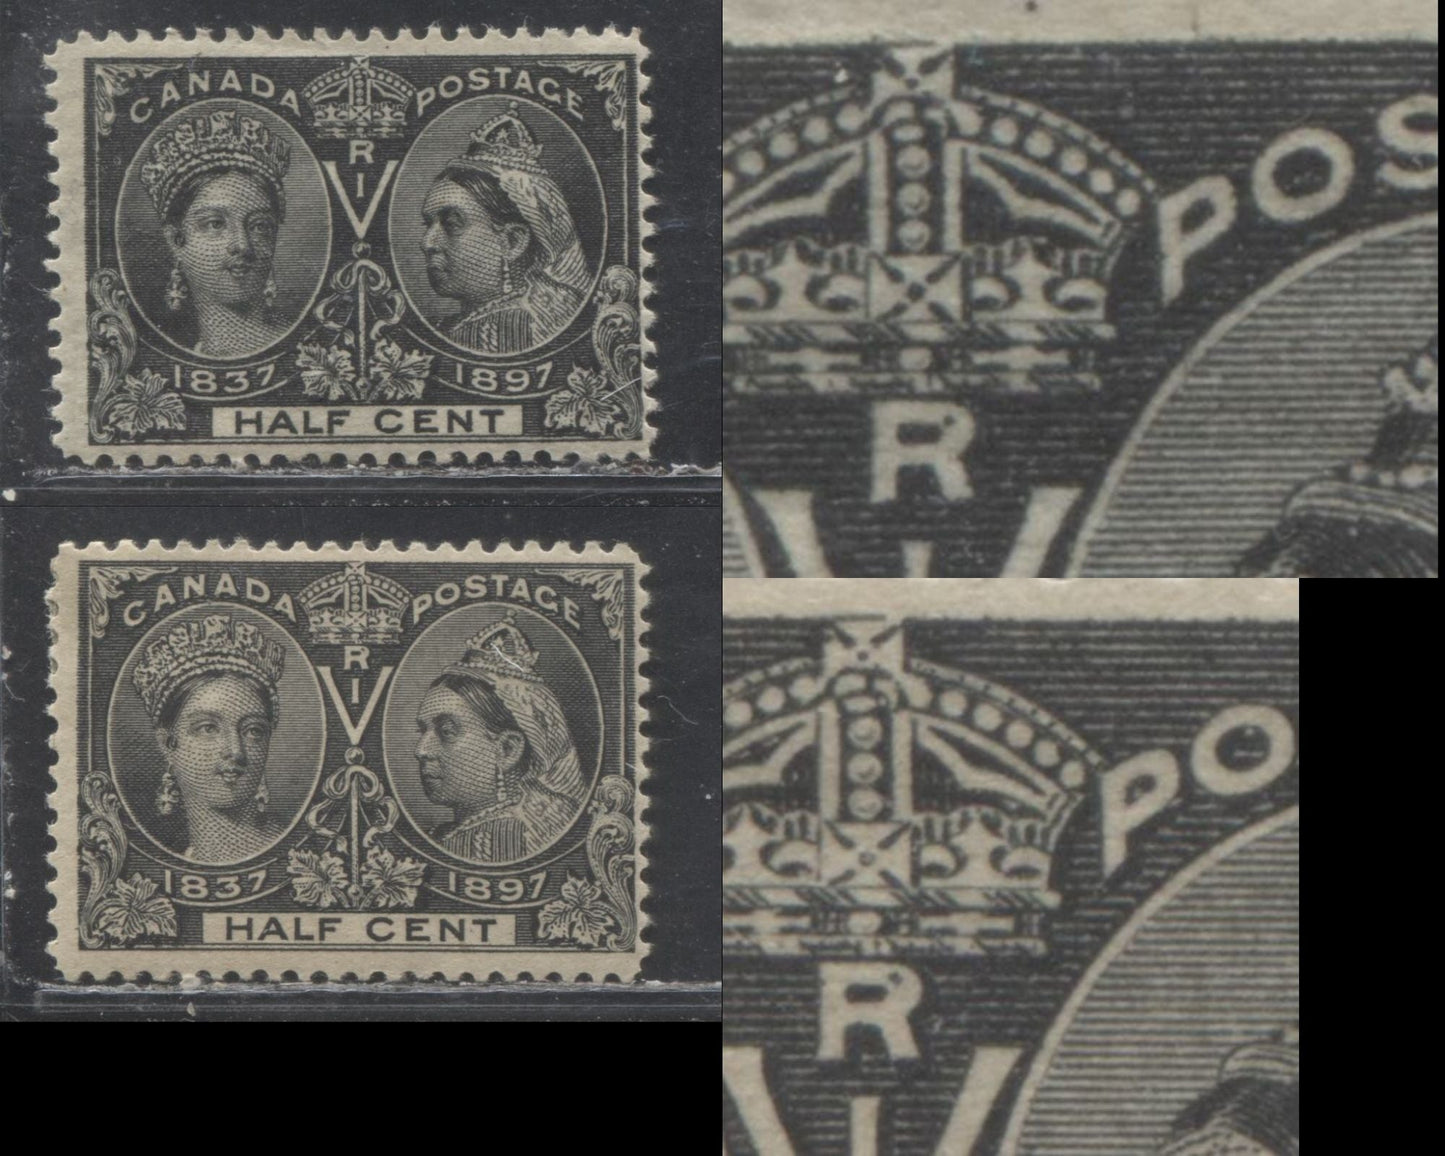 Lot 155 Canada # 50 1/2c Jet Black and Grey Black Queen Victoria, 1897 Diamond Jubilee Issue, Two Fine OG Examples of Both Shades on White and Toned Paper